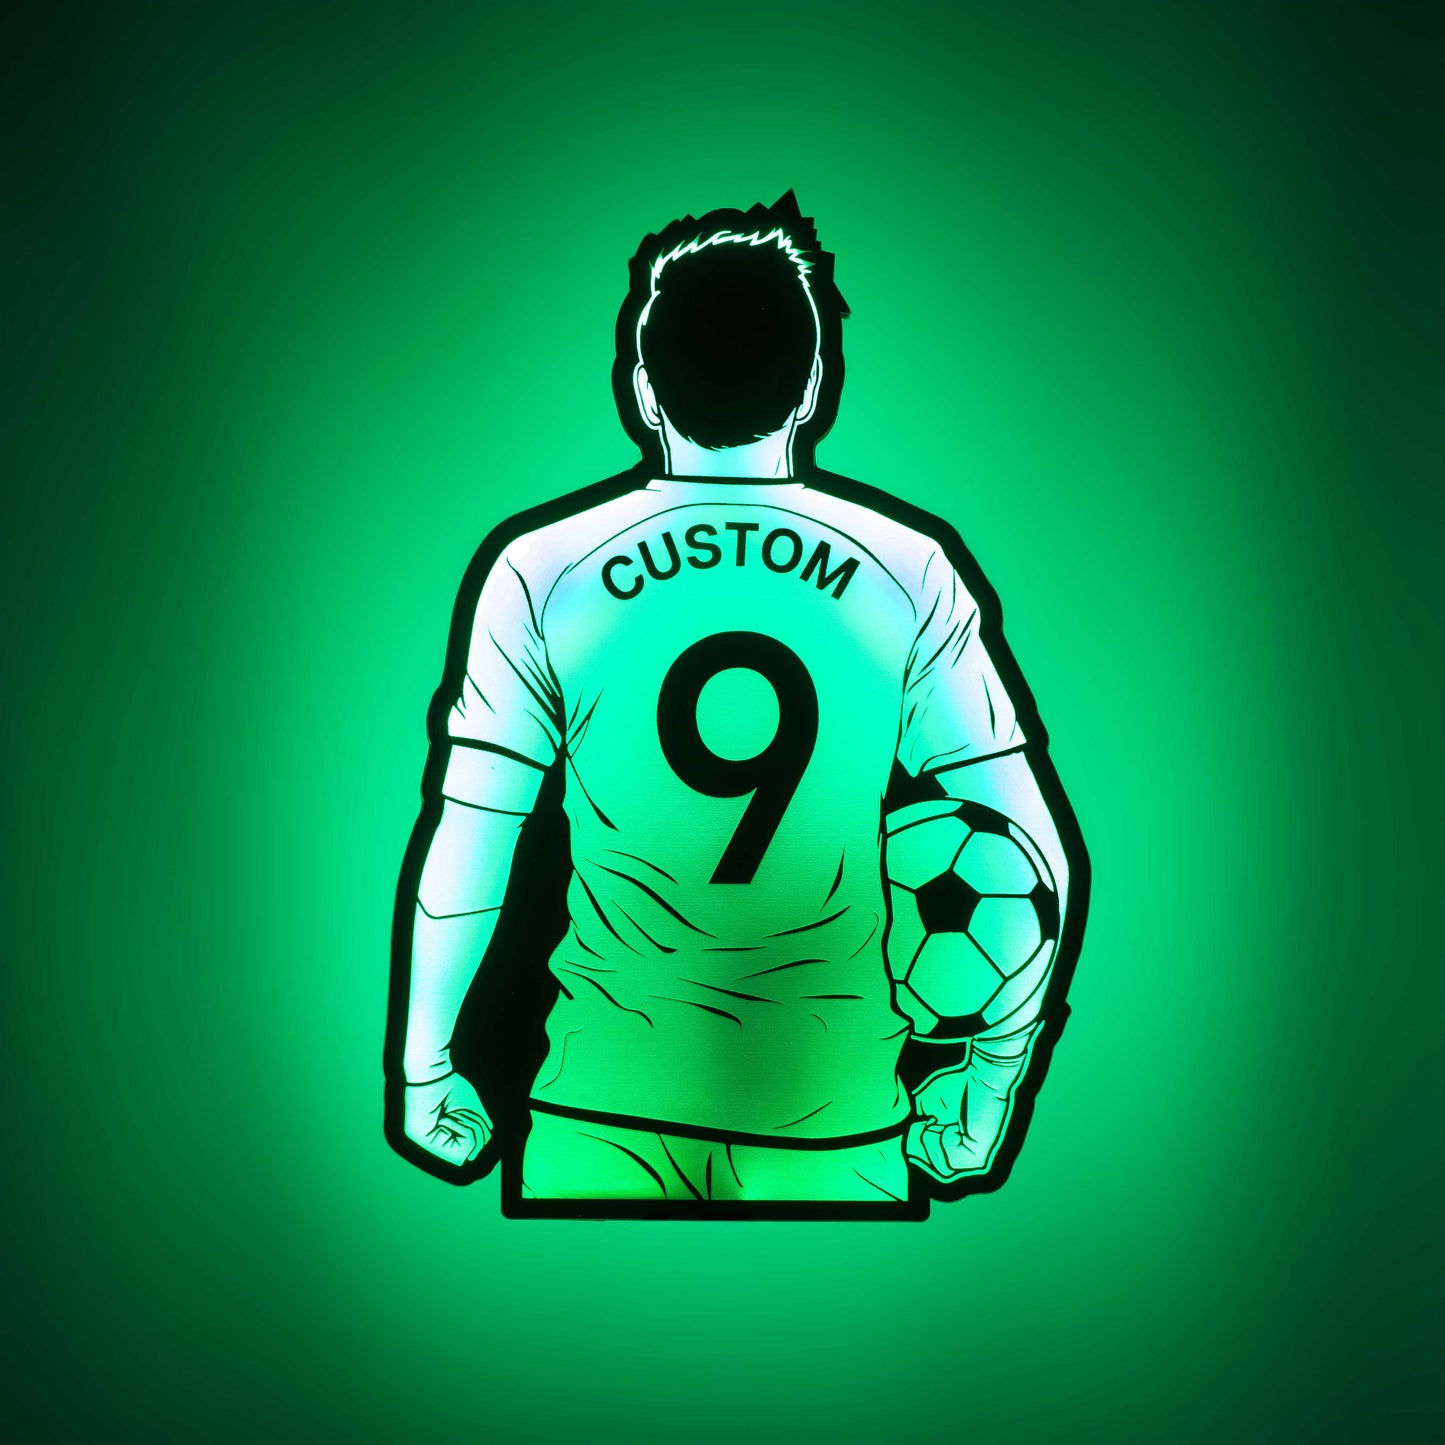 a 3d wall mounted acrylic light, back-lit by  multi-color led lights, featuring a cartoon style illustration of soccer player holding a soccer ball under his arm, view from behind showing the back of the soccer players jersey. The text and number on the back of the jersey can be personalised.